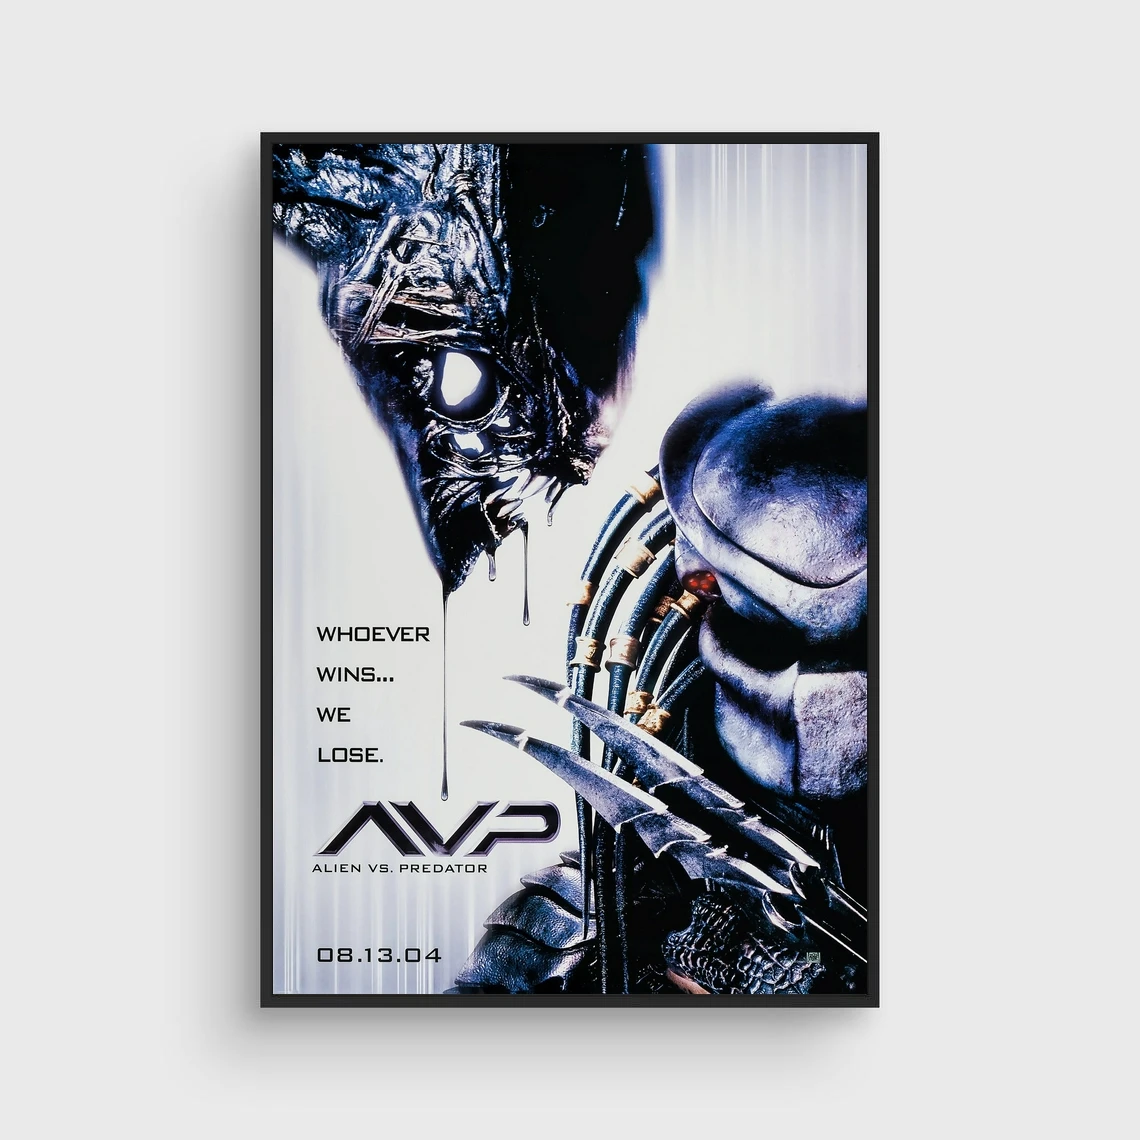 Alien Vs Predator Movie Poster Canvas Print Home Wall Painting Decoration  (No Frame)|Painting & Calligraphy| - AliExpress